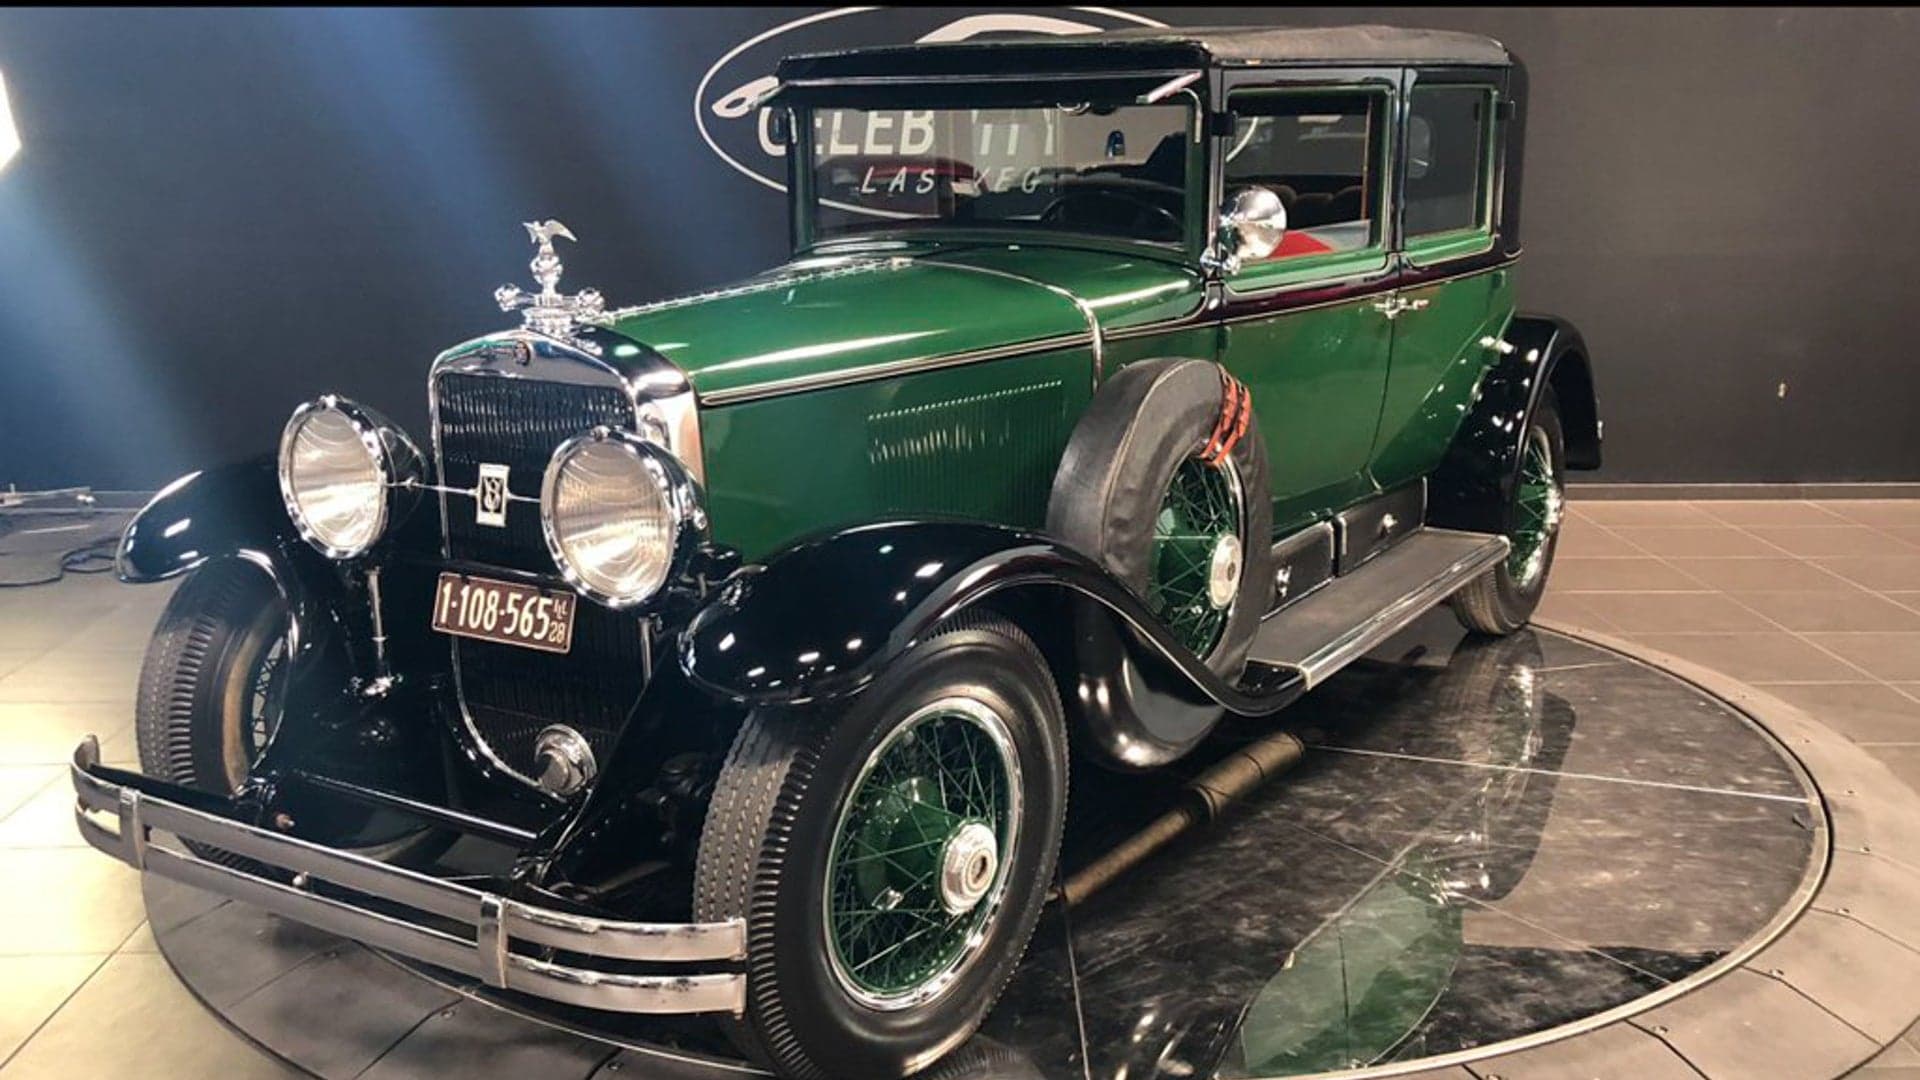 The Bulletproof 1928 Cadillac Once Owned by Infamous Gangster Al Capone Is Listed for a Cool $1M